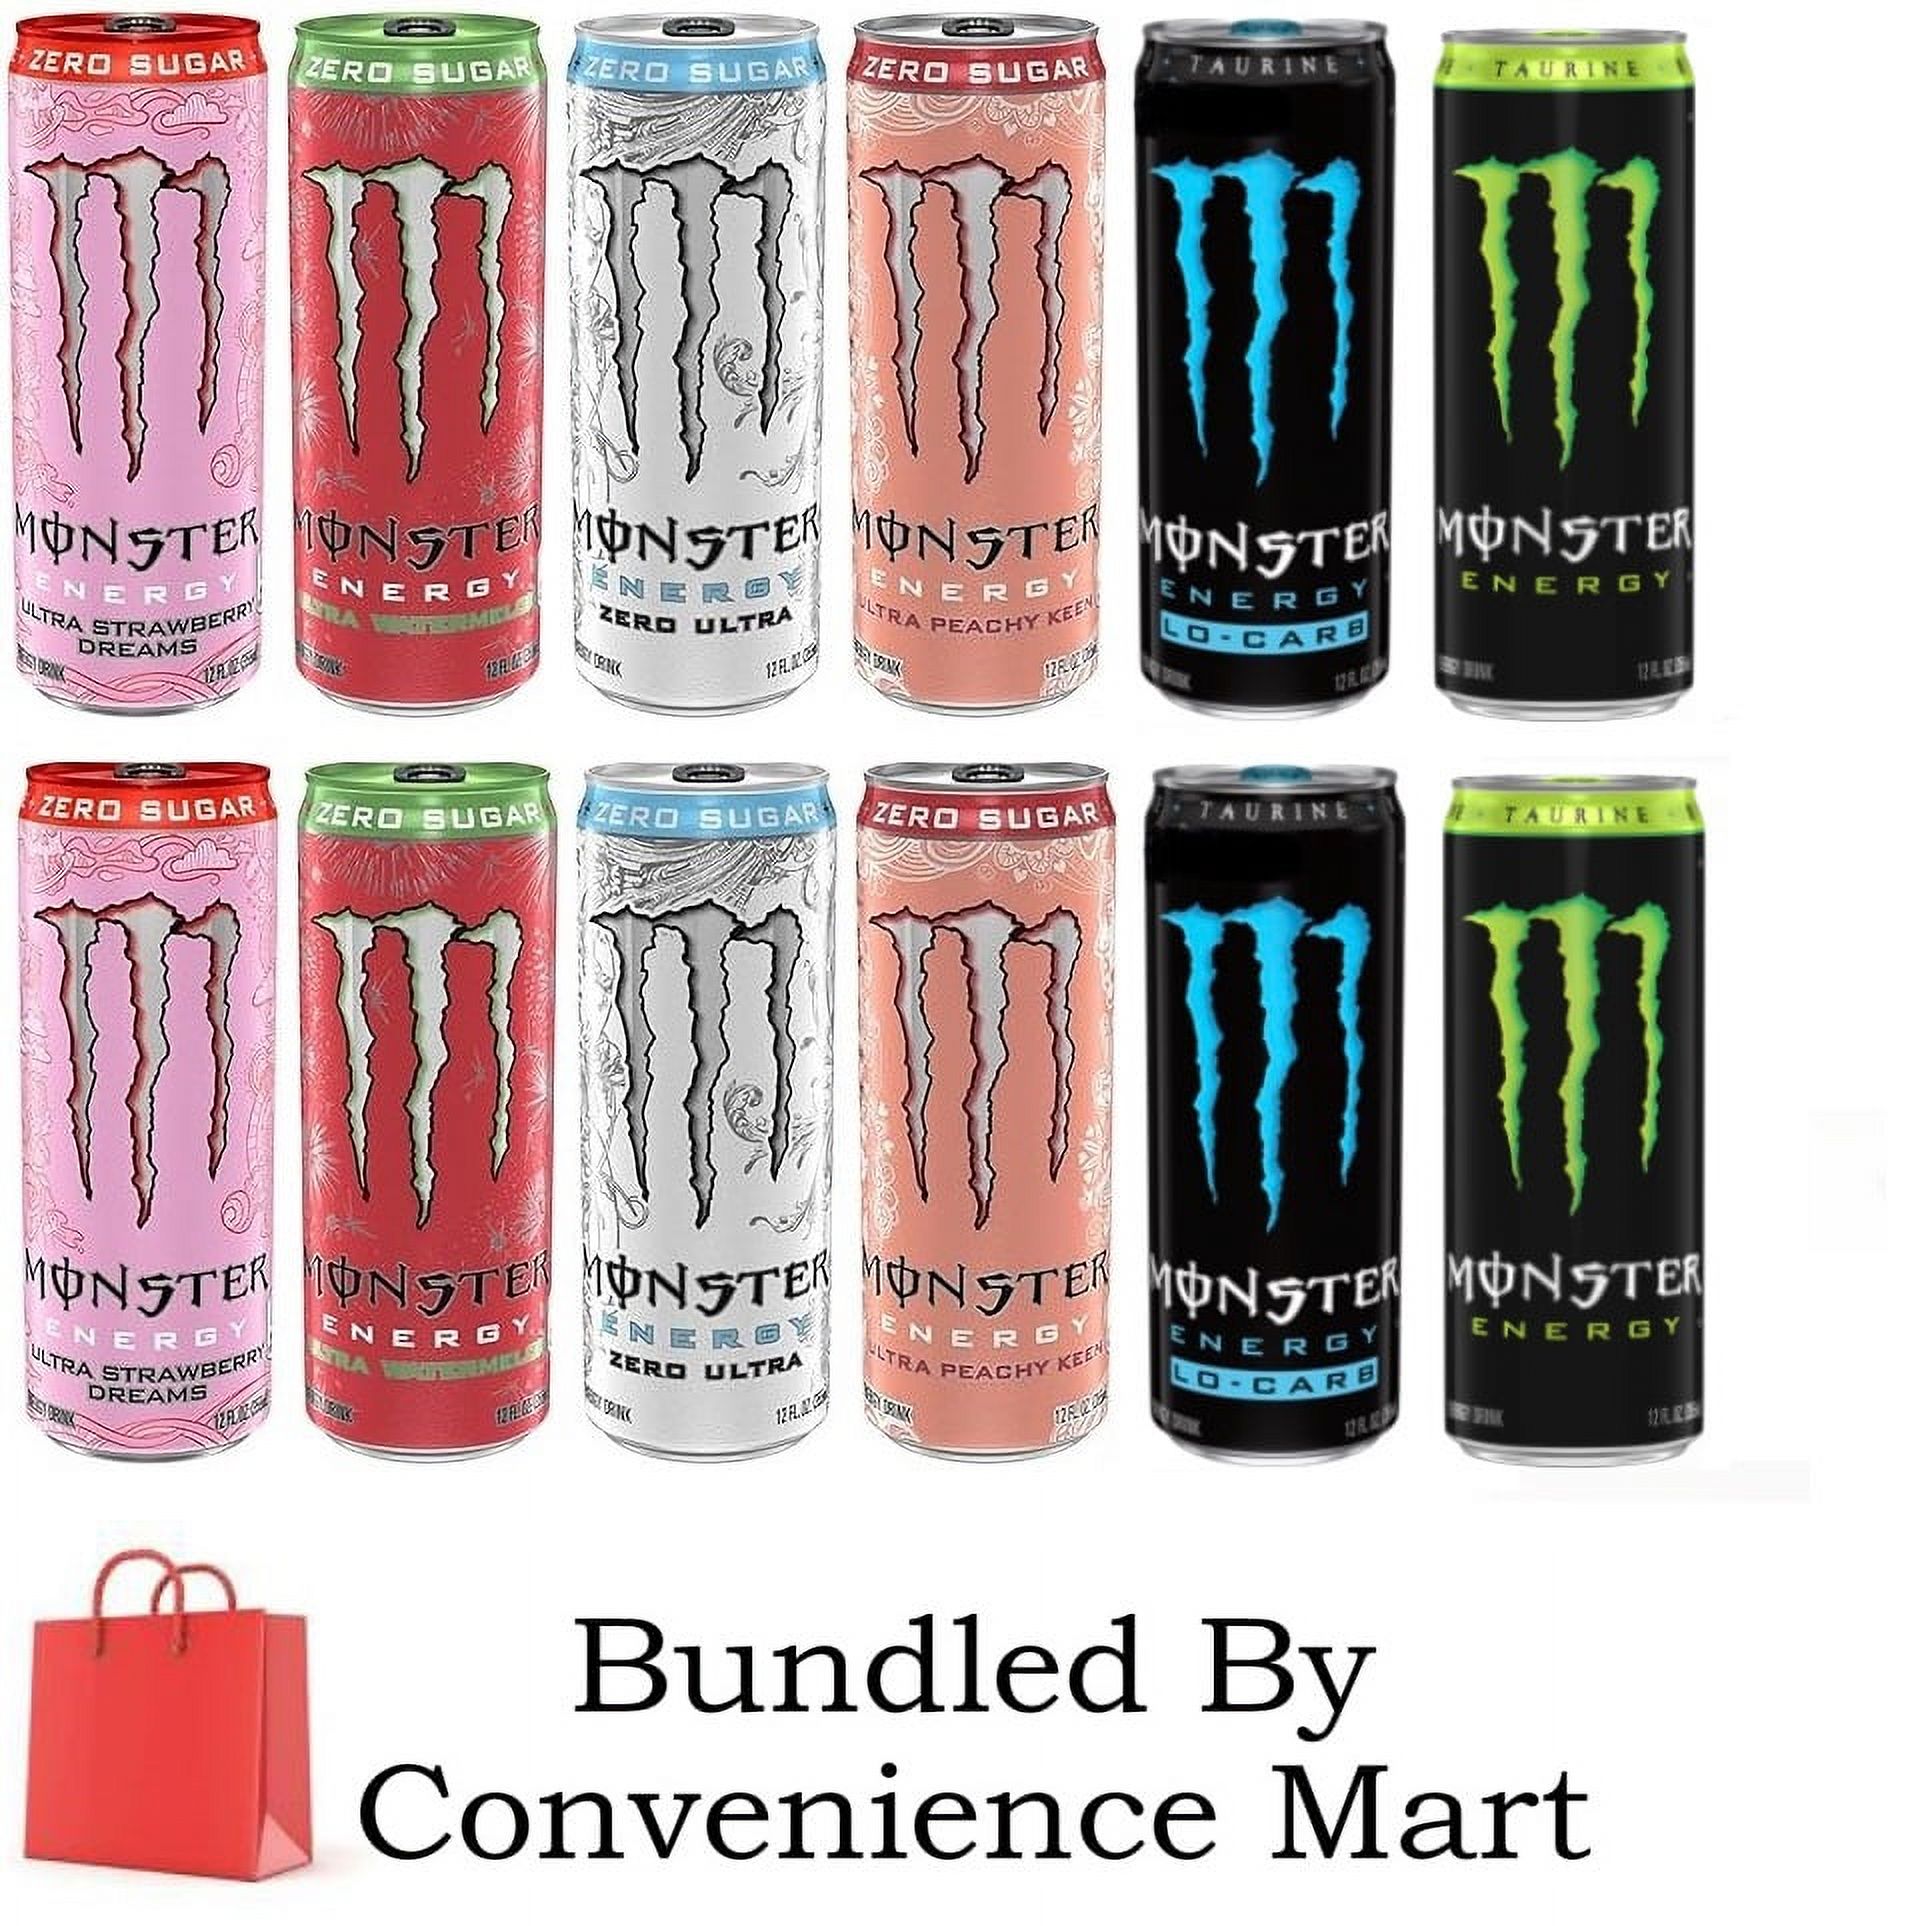 Monster Energy Drink 12oz, Sugar Free, 6 Flavor Variety Pack, Bundled by Convenience Mart, 12 Ounce (12-Pack) - image 1 of 9